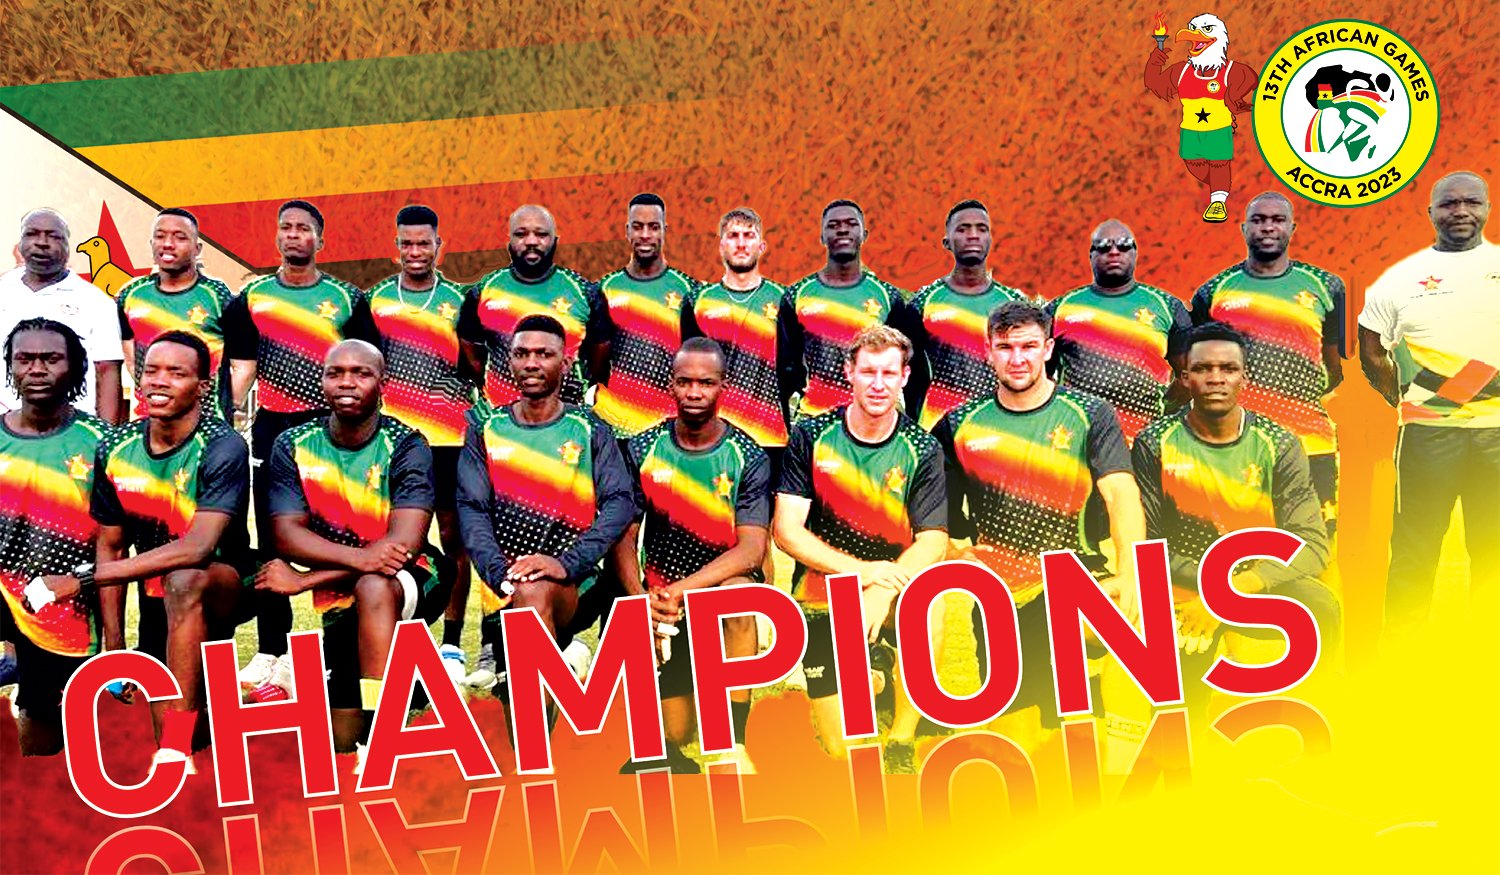 Zimbabwe’s Men’s Cricket Team Clinches Gold at Africa Games with Convincing Victory Over Namibia